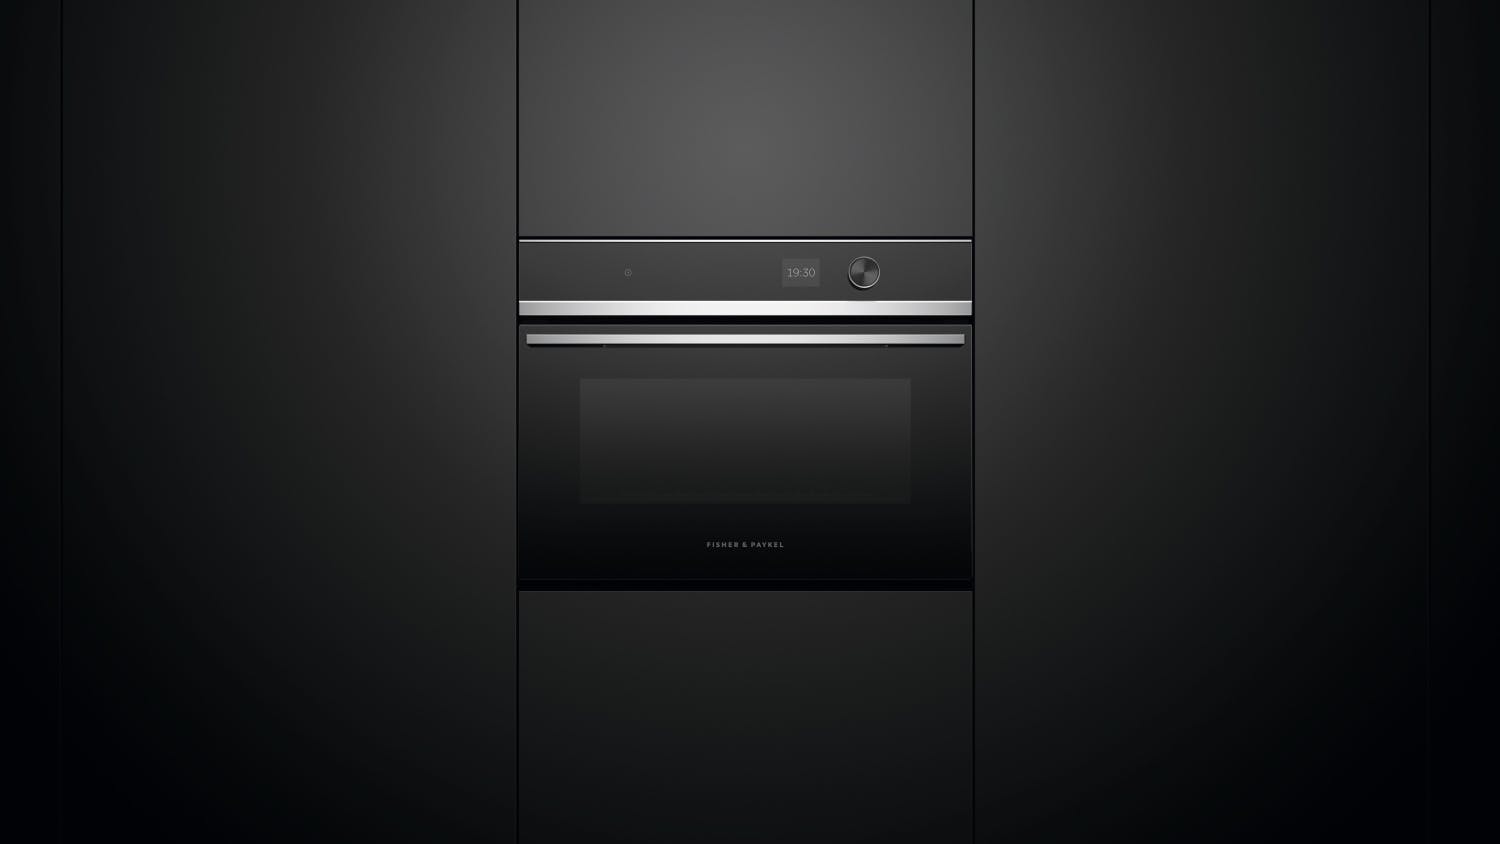 Fisher & Paykel 60cm 18 Function Built-In Compact Steam Oven - Stainless Steel (Series 7/OS60NDLX1)